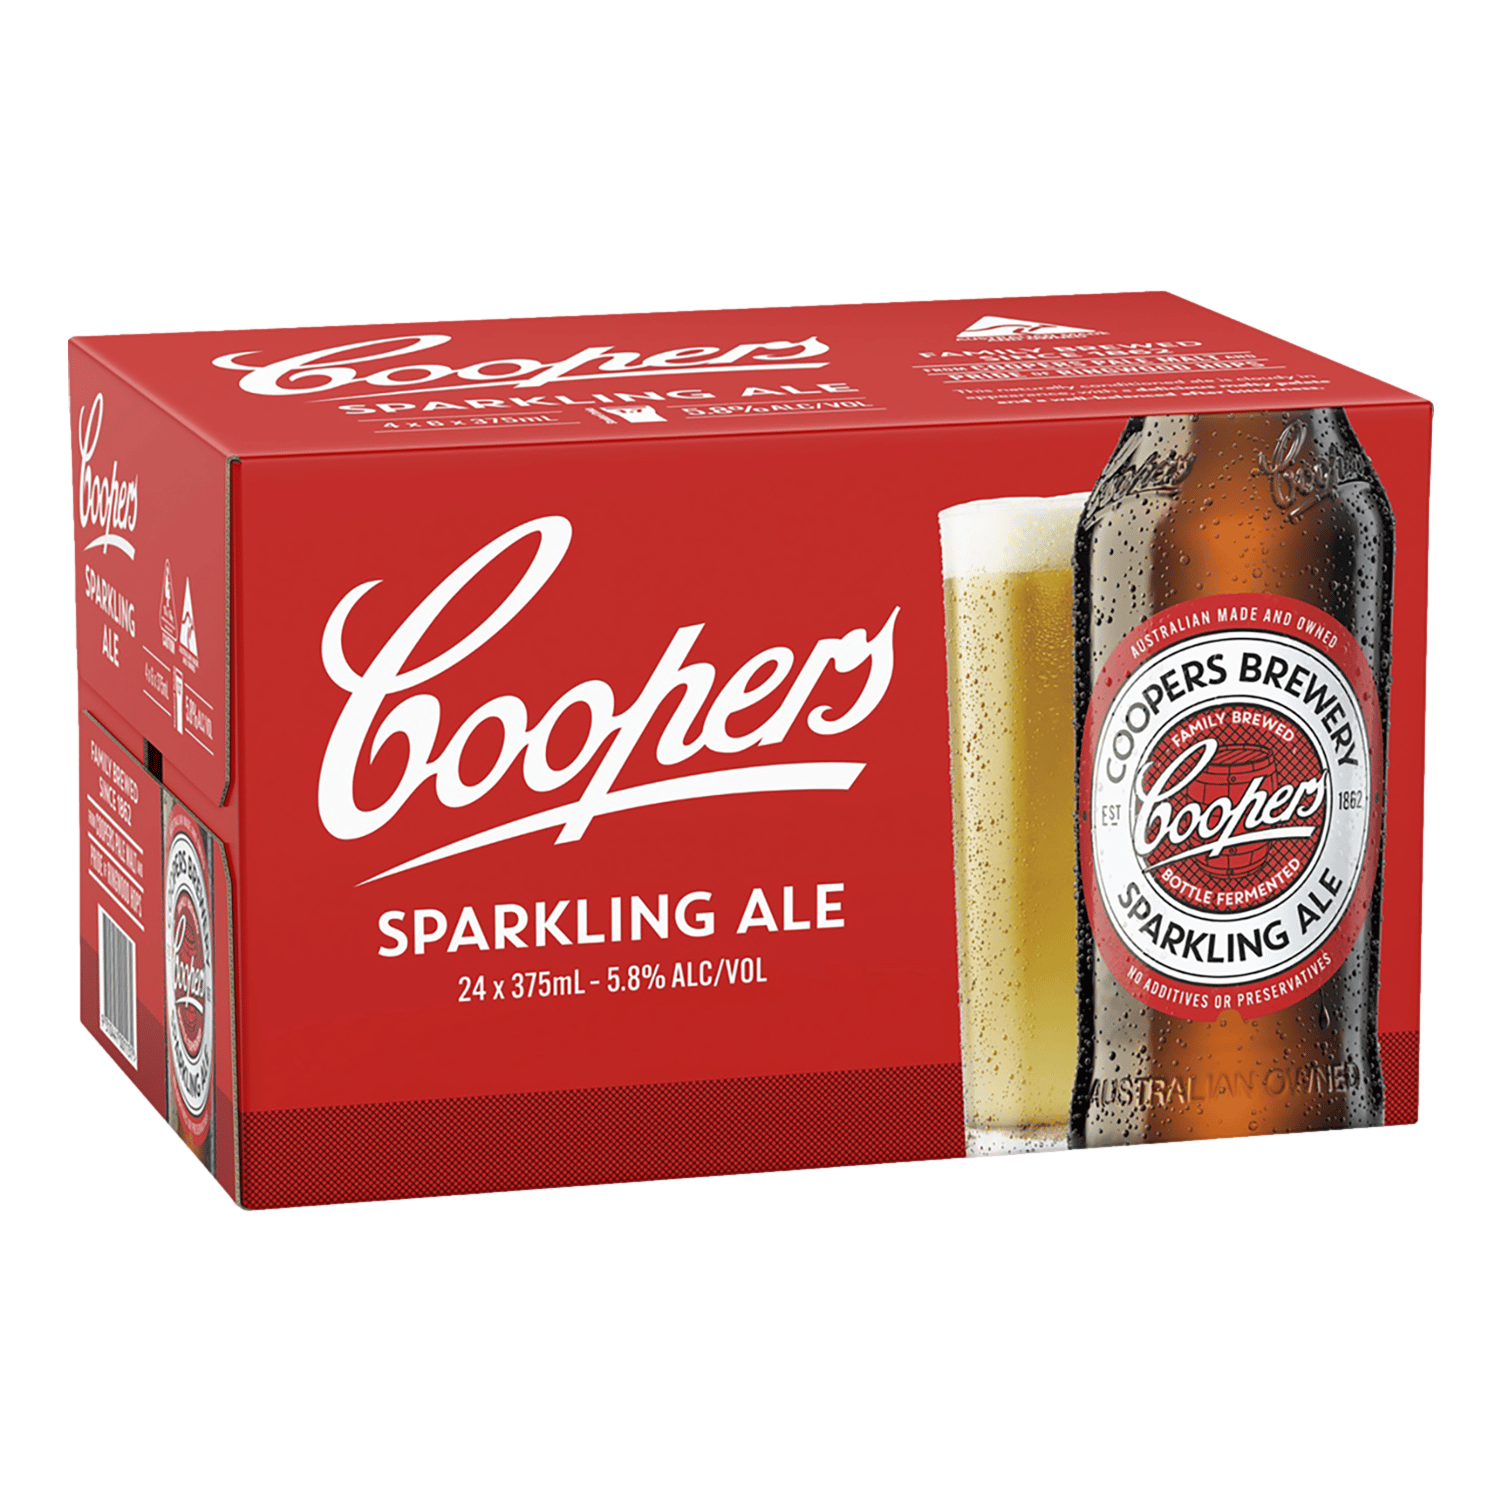 Coopers Sparkling Ale 375ml Bottle Case of 24